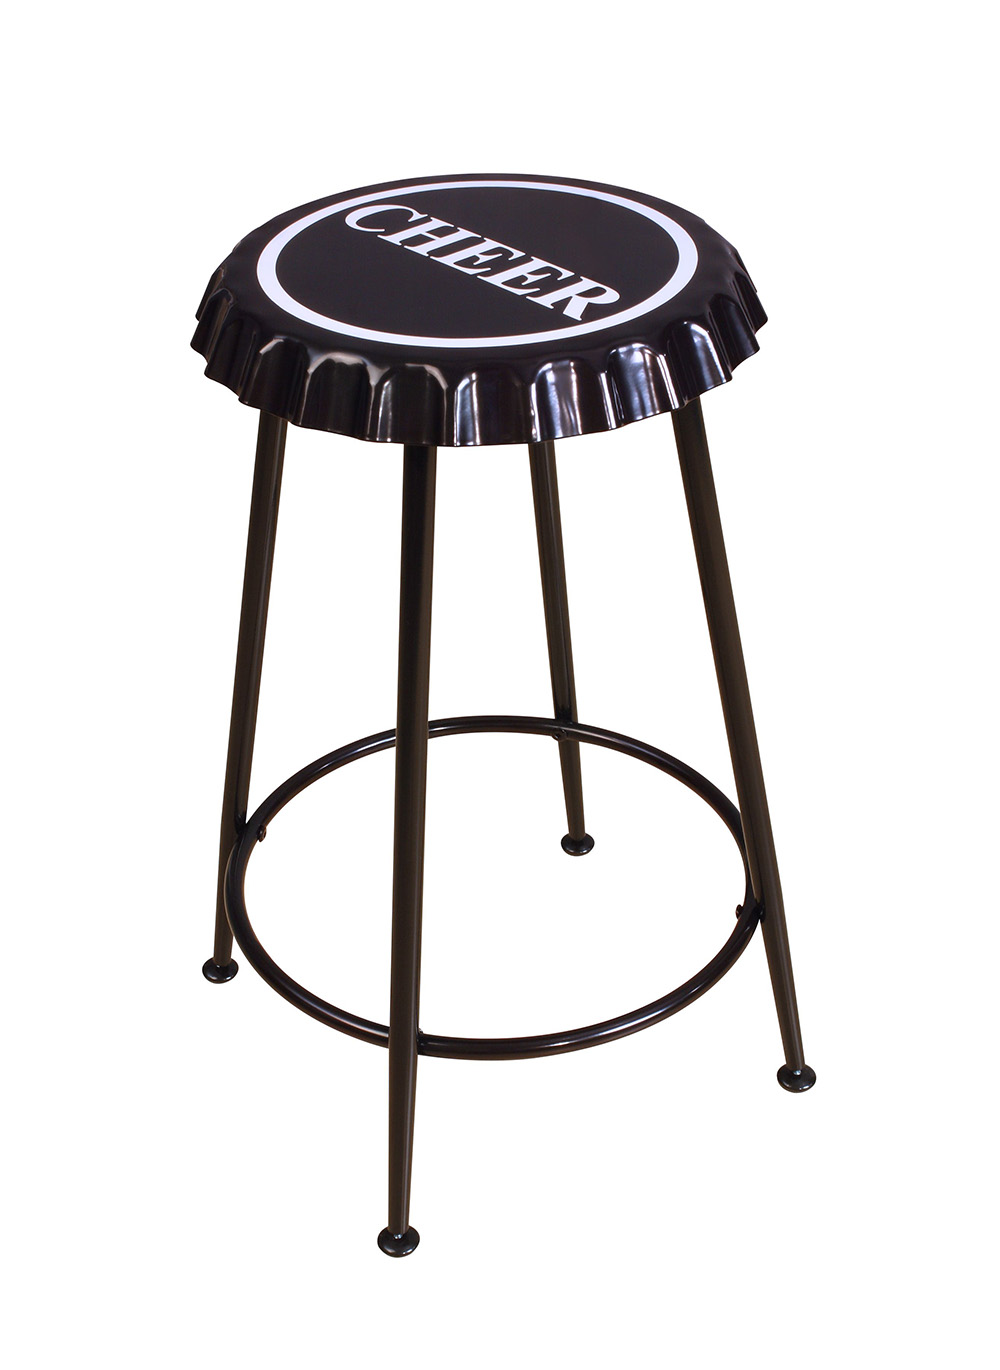 ACME Mant Counter Height Stool Set of 2, with Metal Frame, for Restaurant, Cafe, Tavern, Office, Living Room - Black